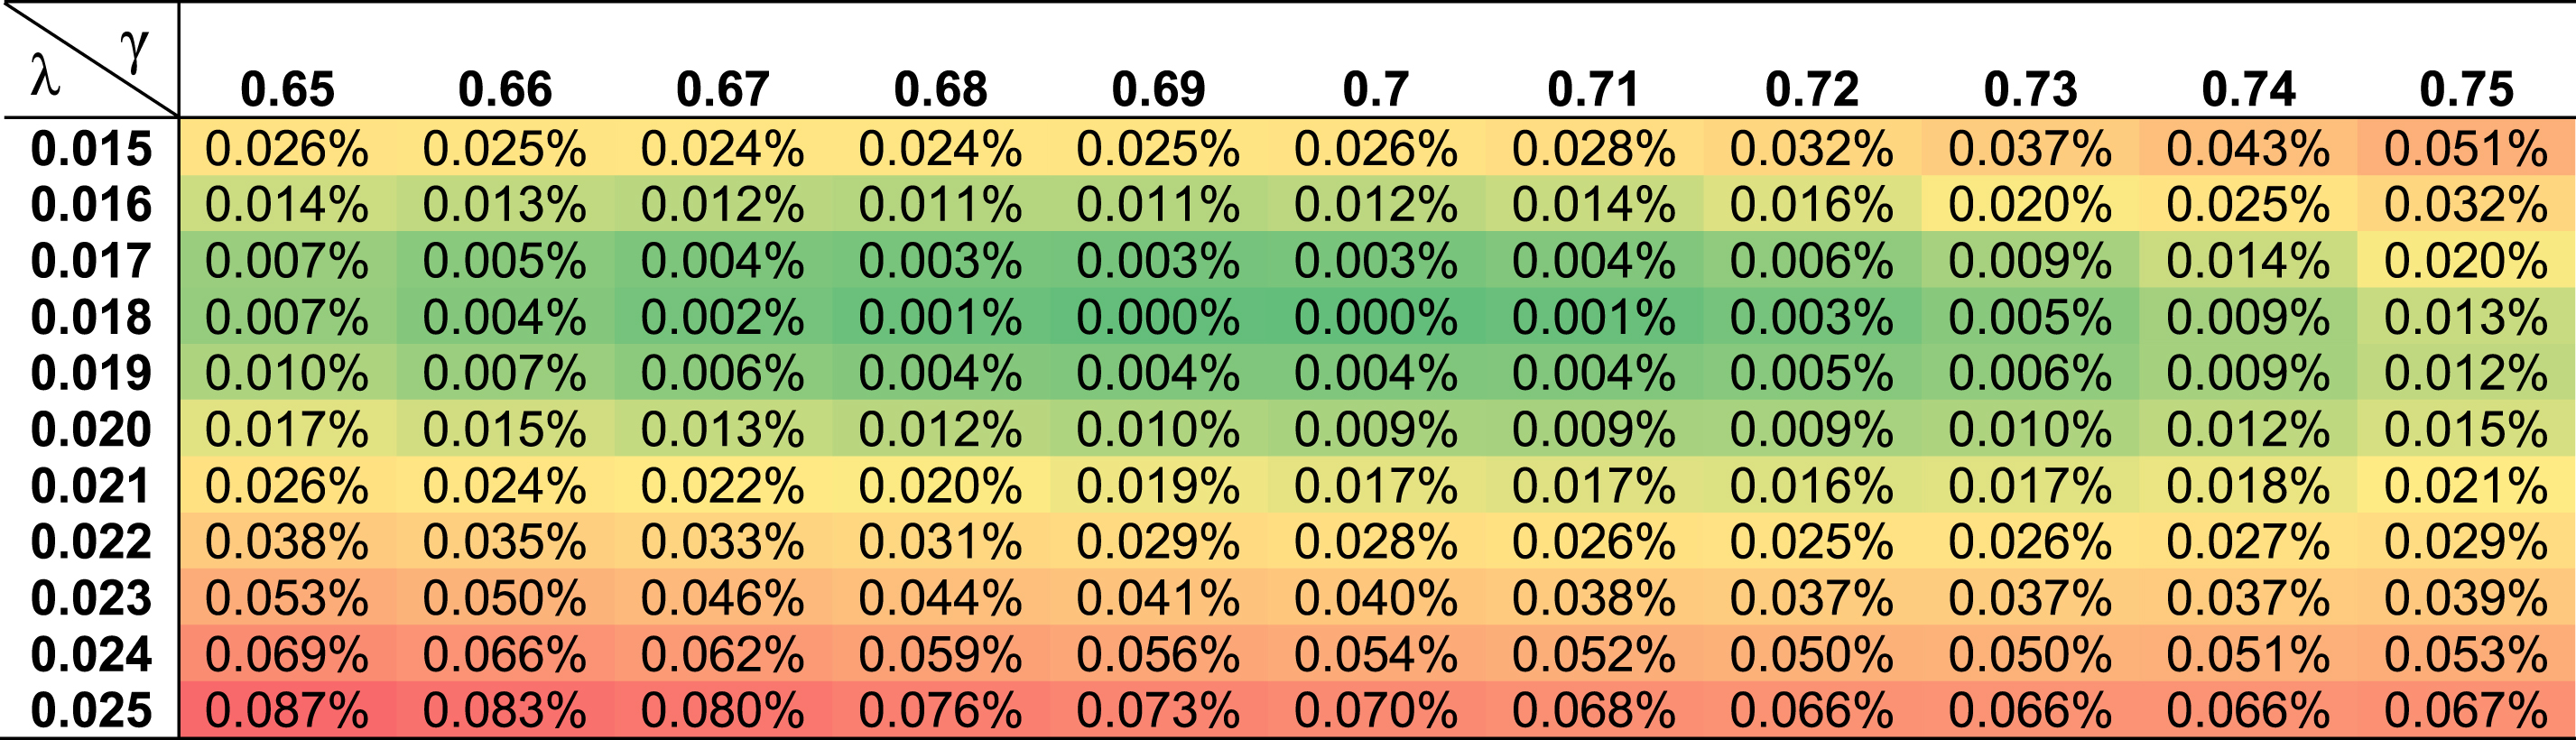 The discrepancy in prediction error e for the different combinations of λ and γ, relative to the optimal inputs of λ= 0.018 and γ= 0.7. Darker green cells represent lower discrepancy, whereas darker red cells represent higher discrepancy. Recommended inputs for λ and γ are the ones that generate up to 0.01% discrepancy